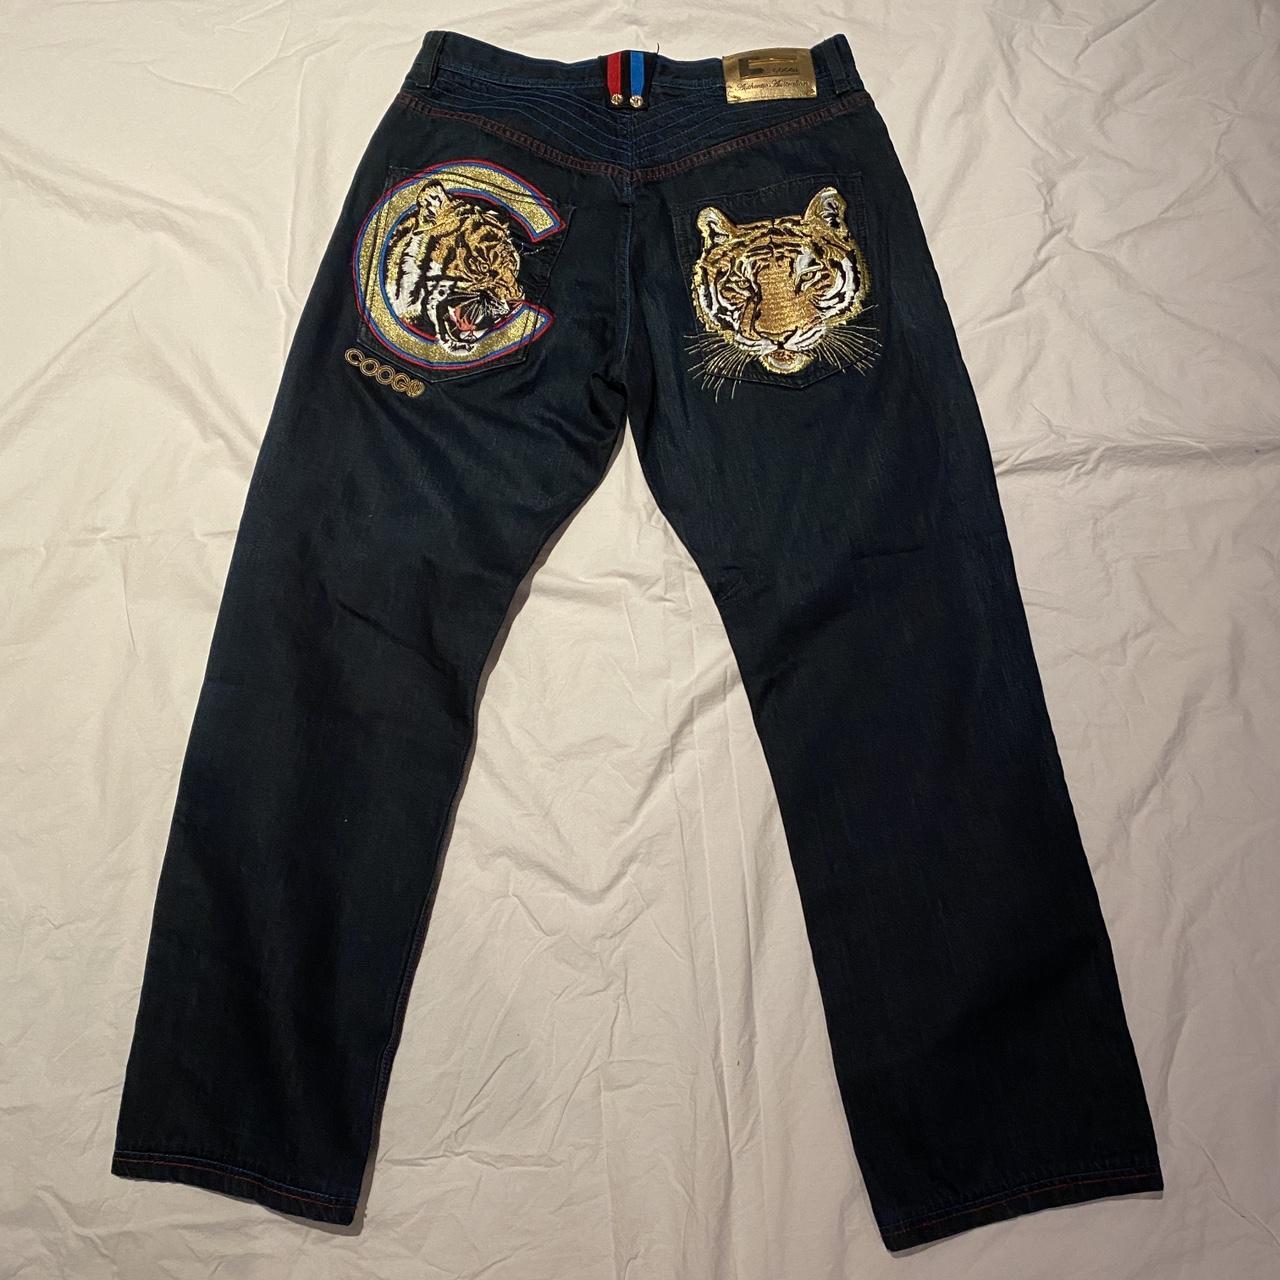 Coogi Men's Black and Yellow Jeans (2)